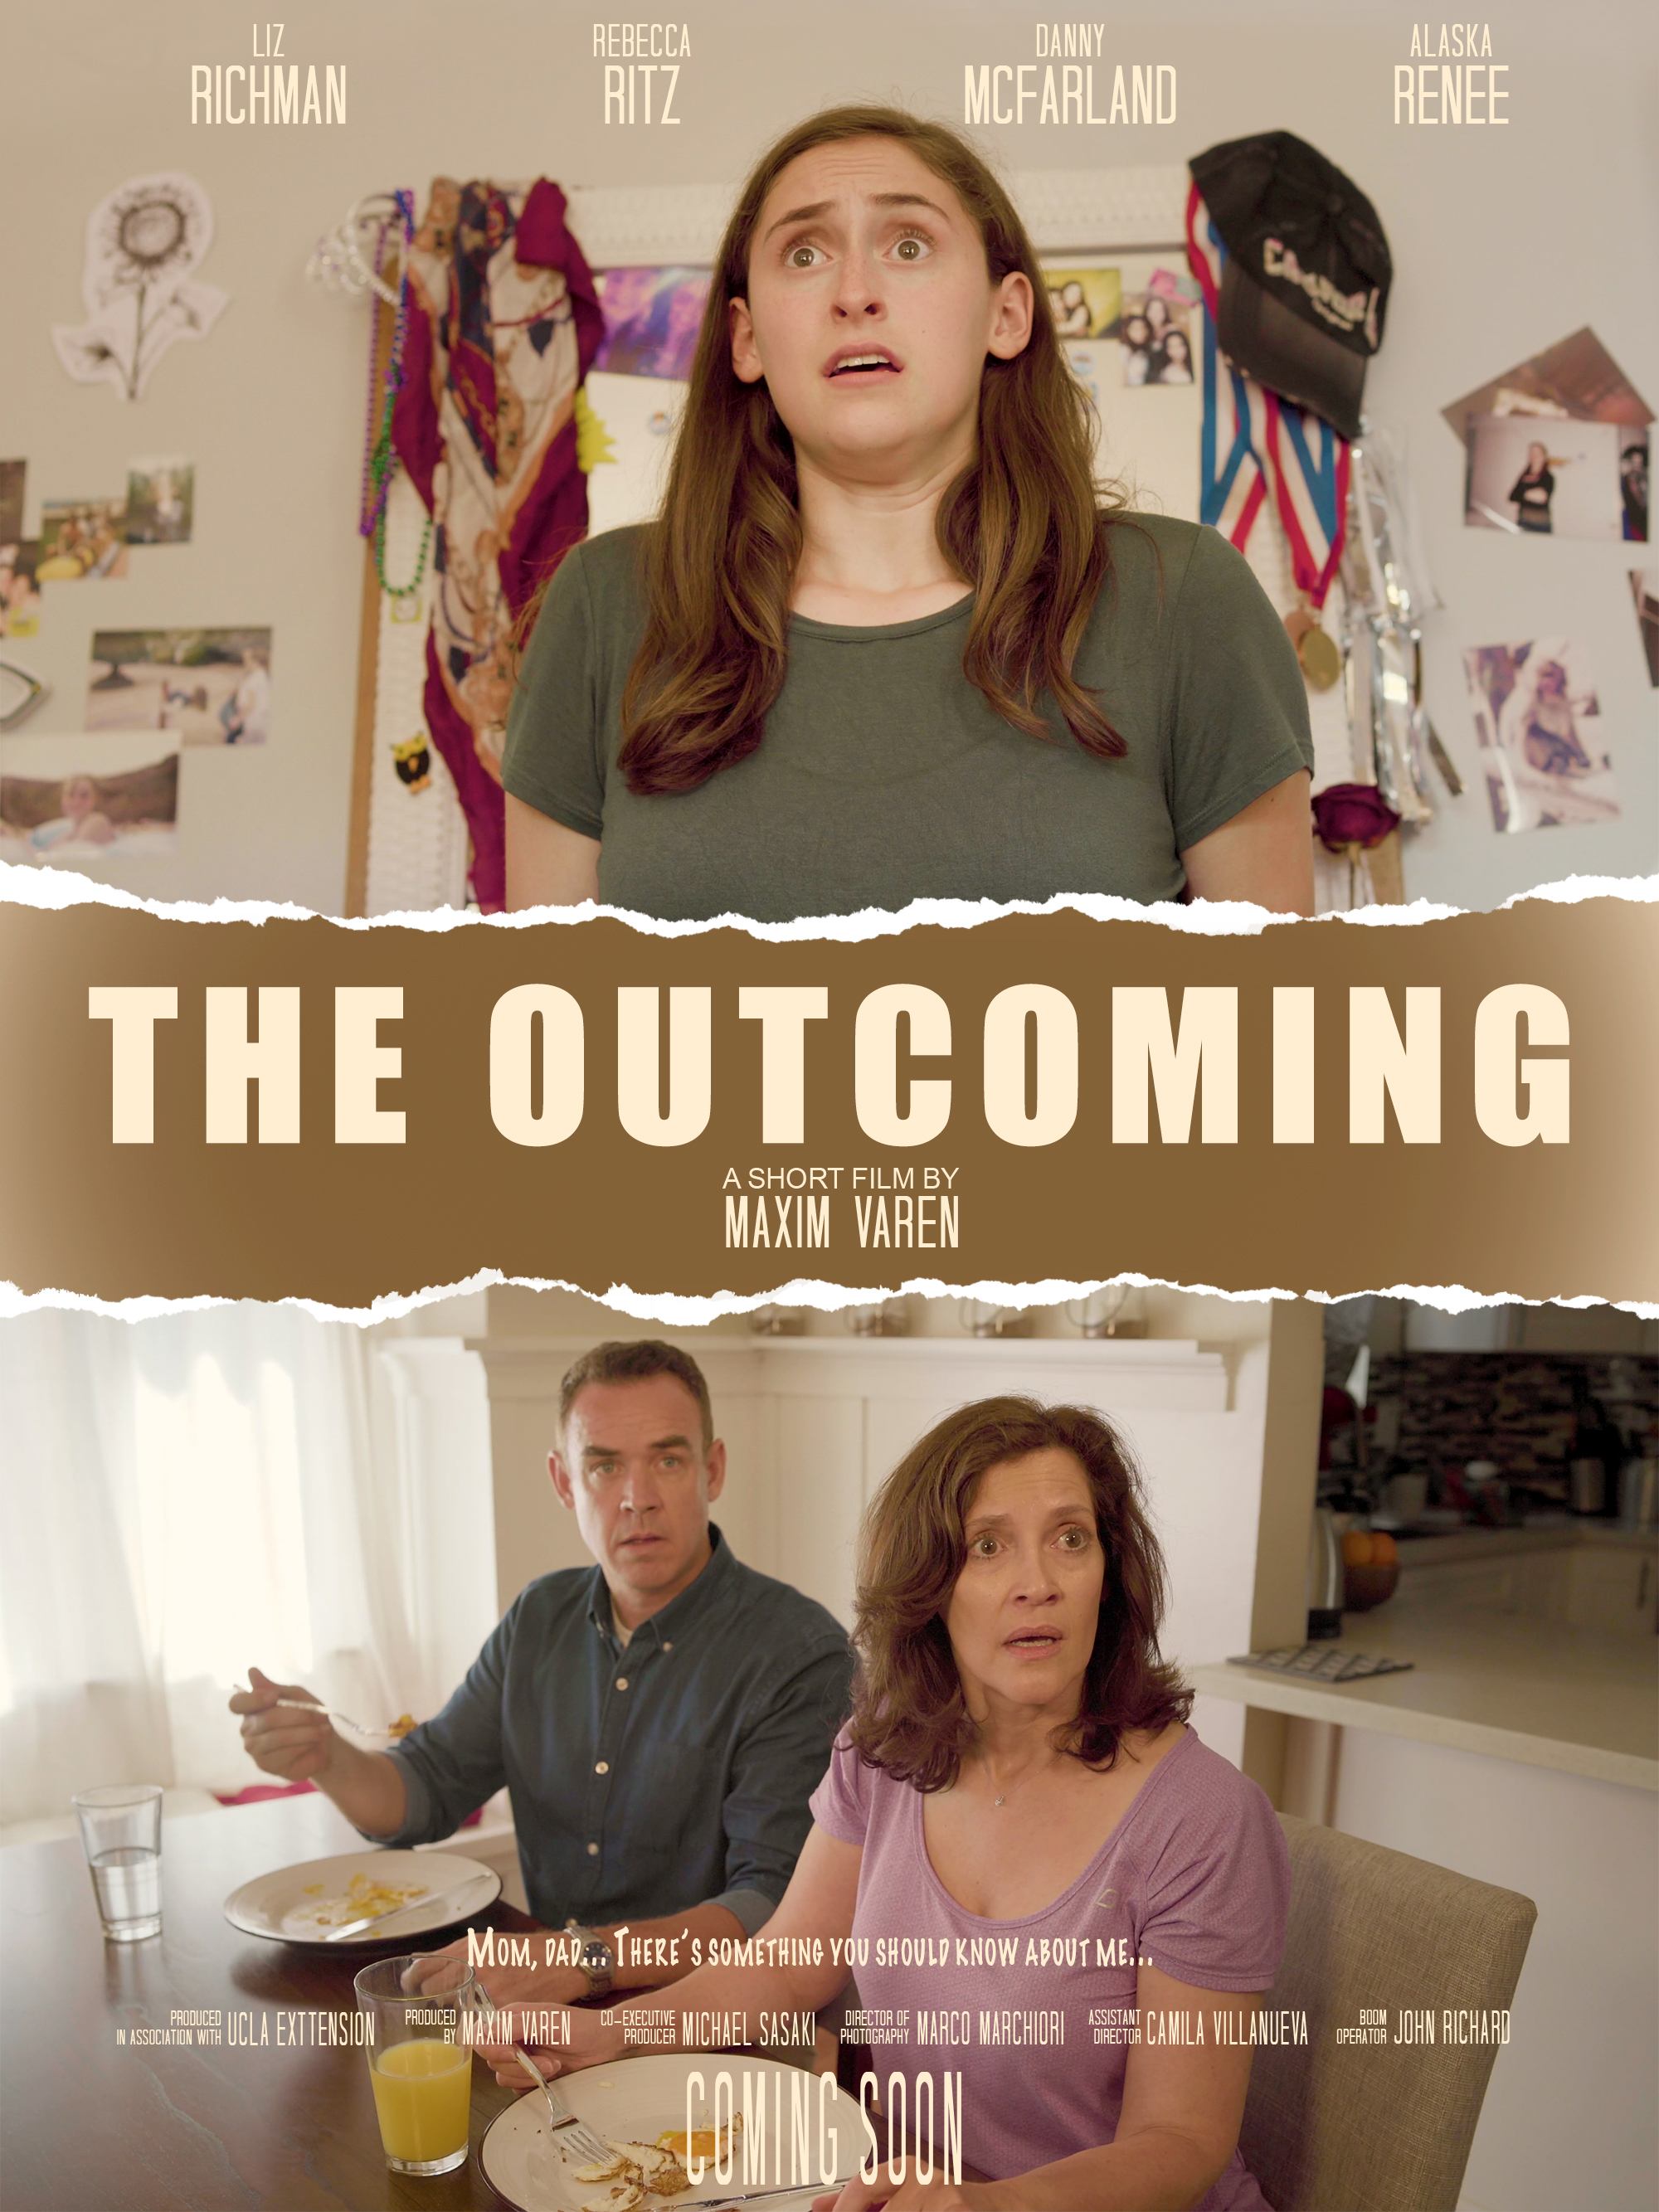 The Outcoming